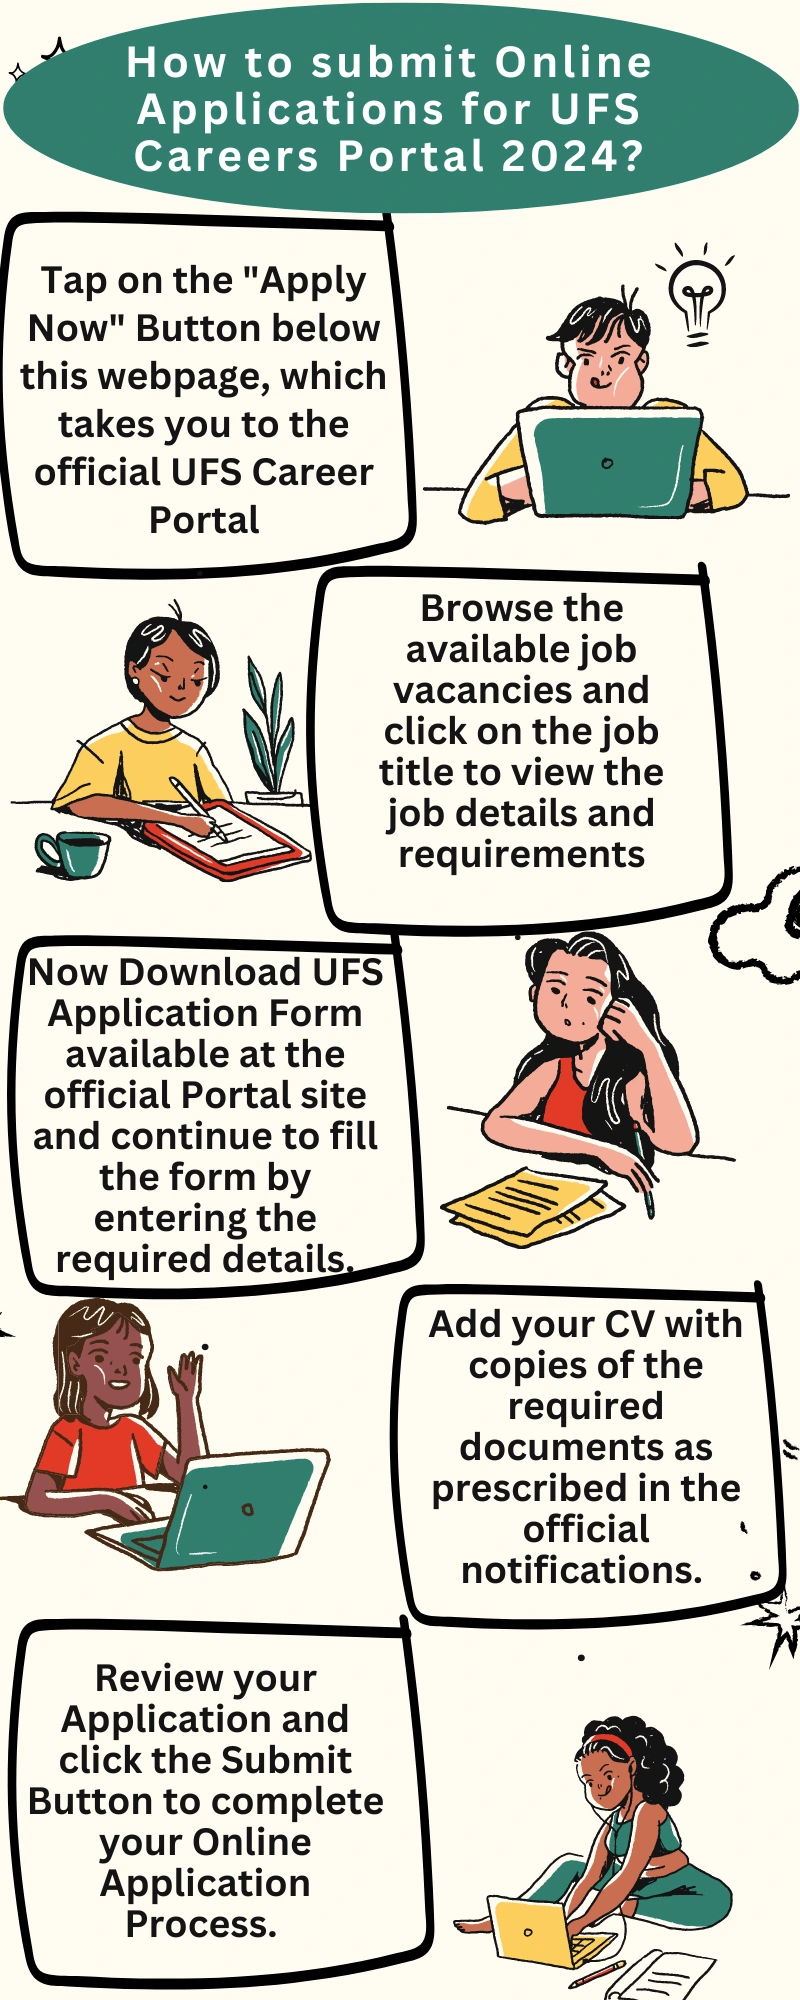 How to submit Online Applications for UFS Careers Portal 2024?